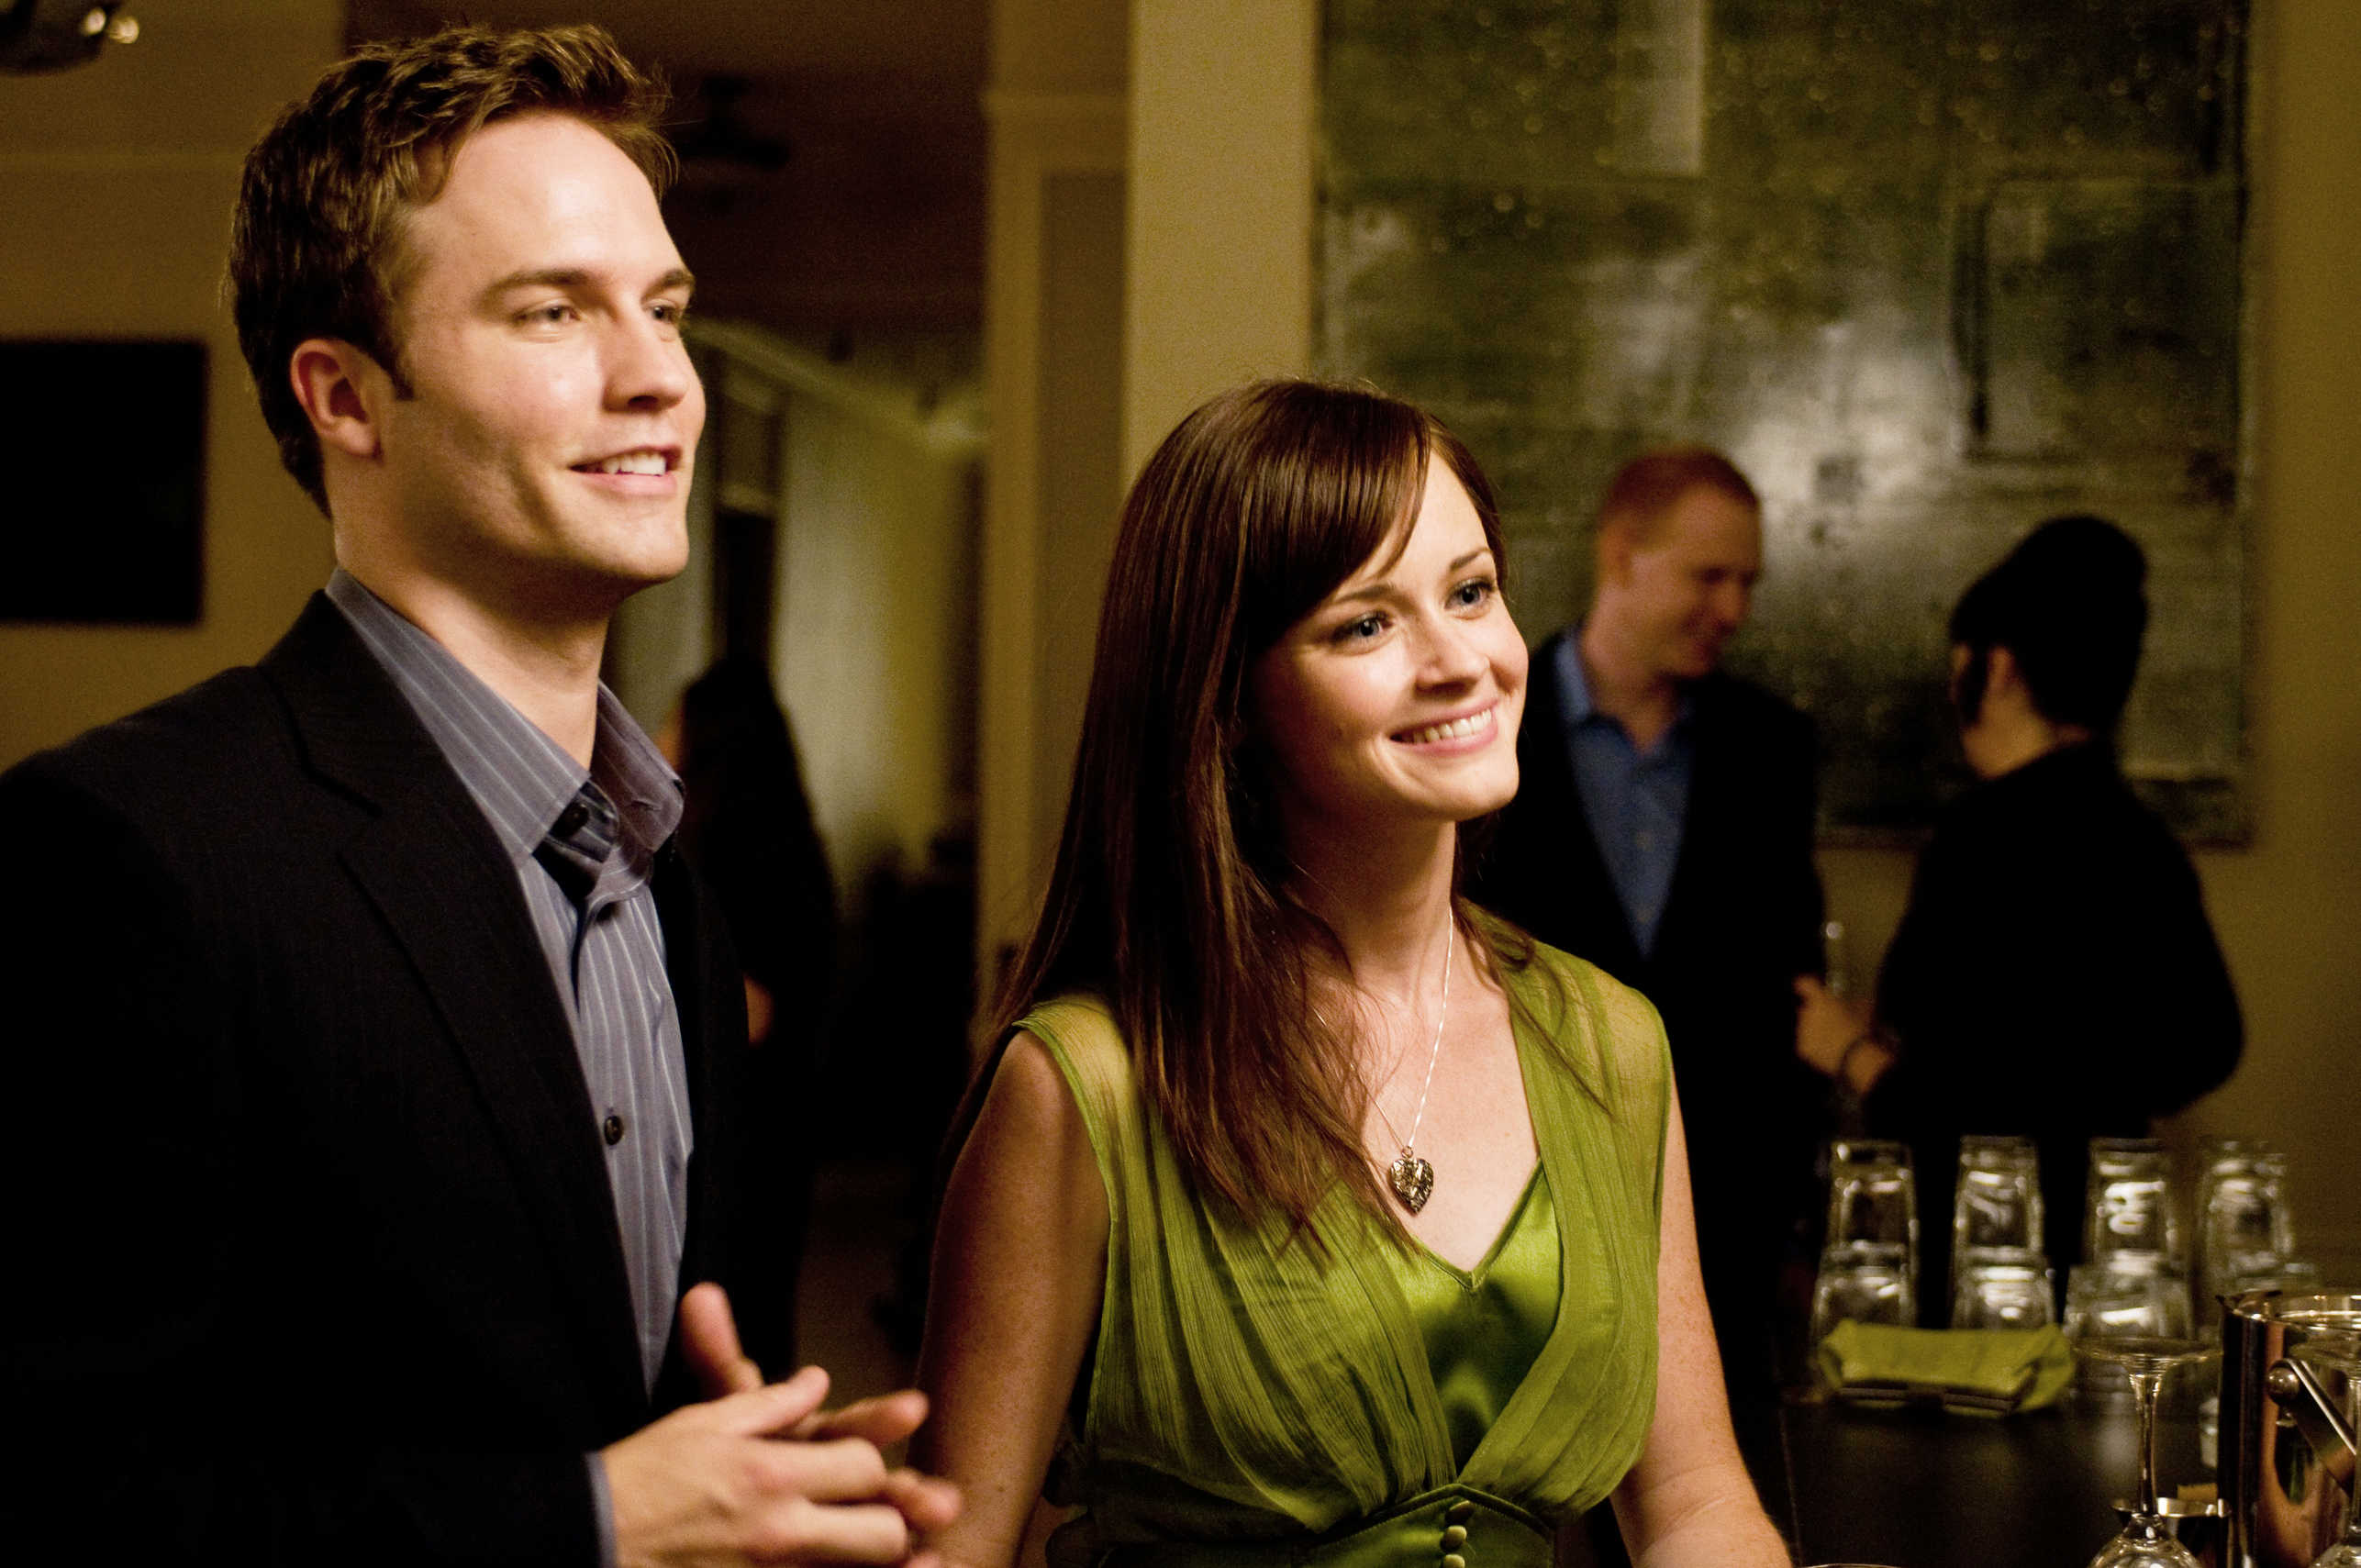 Scott Porter stars as Tommy Fielding and Alexis Bledel stars as Beth Vest in Roadside Attractions' The Good Guy (2010)